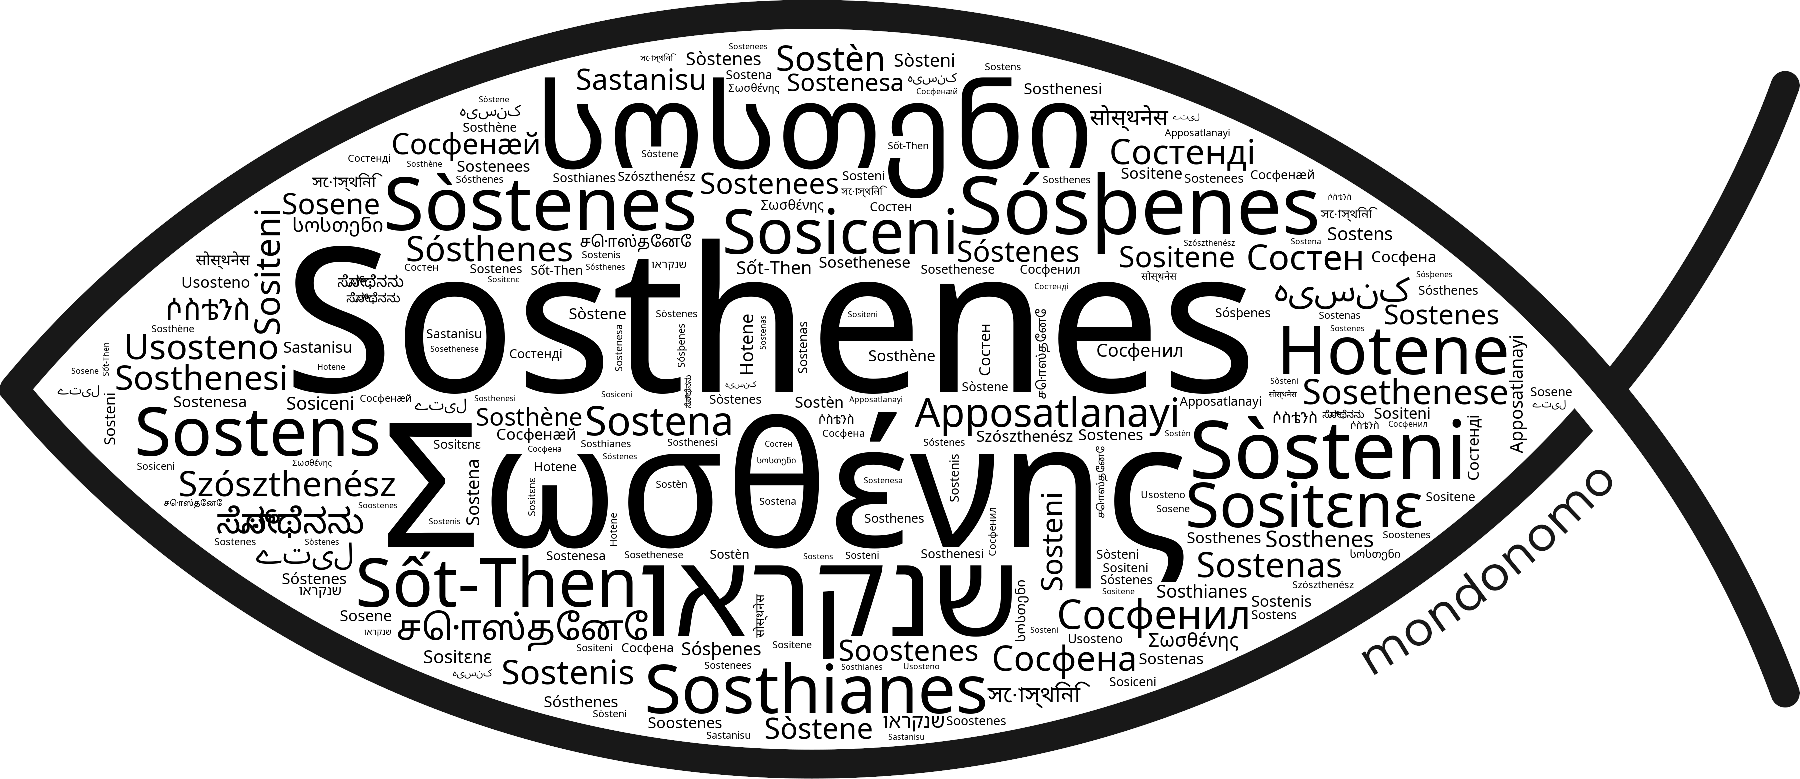 Name Sosthenes in the world's Bibles